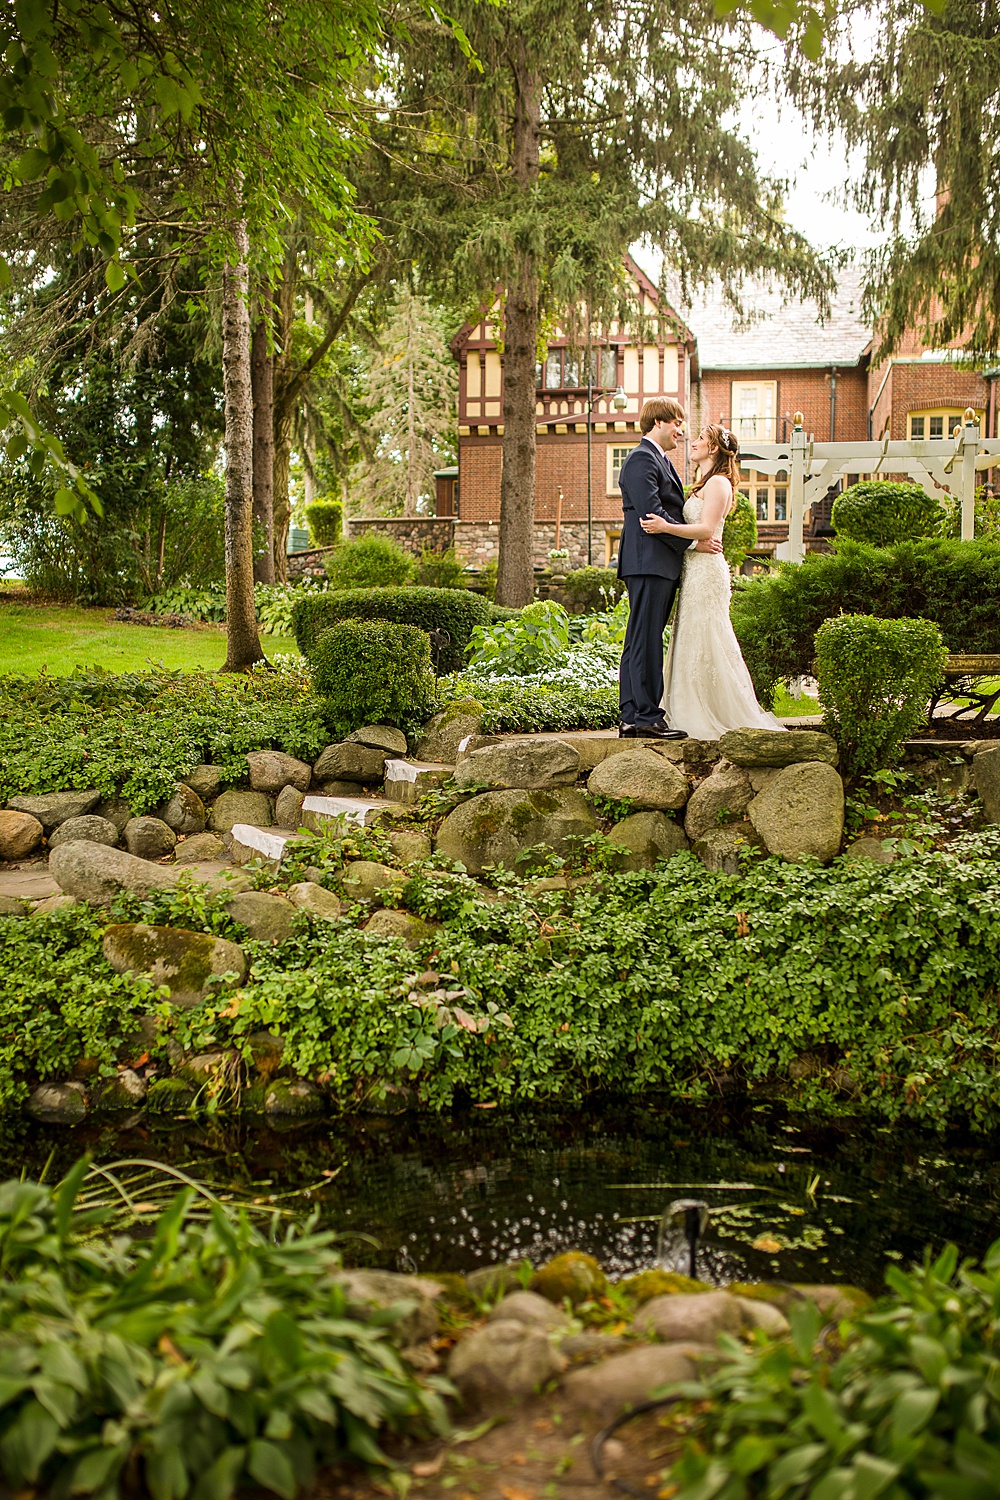 Wedding photographs in the gardens at the English Inn, Eaton Rapids